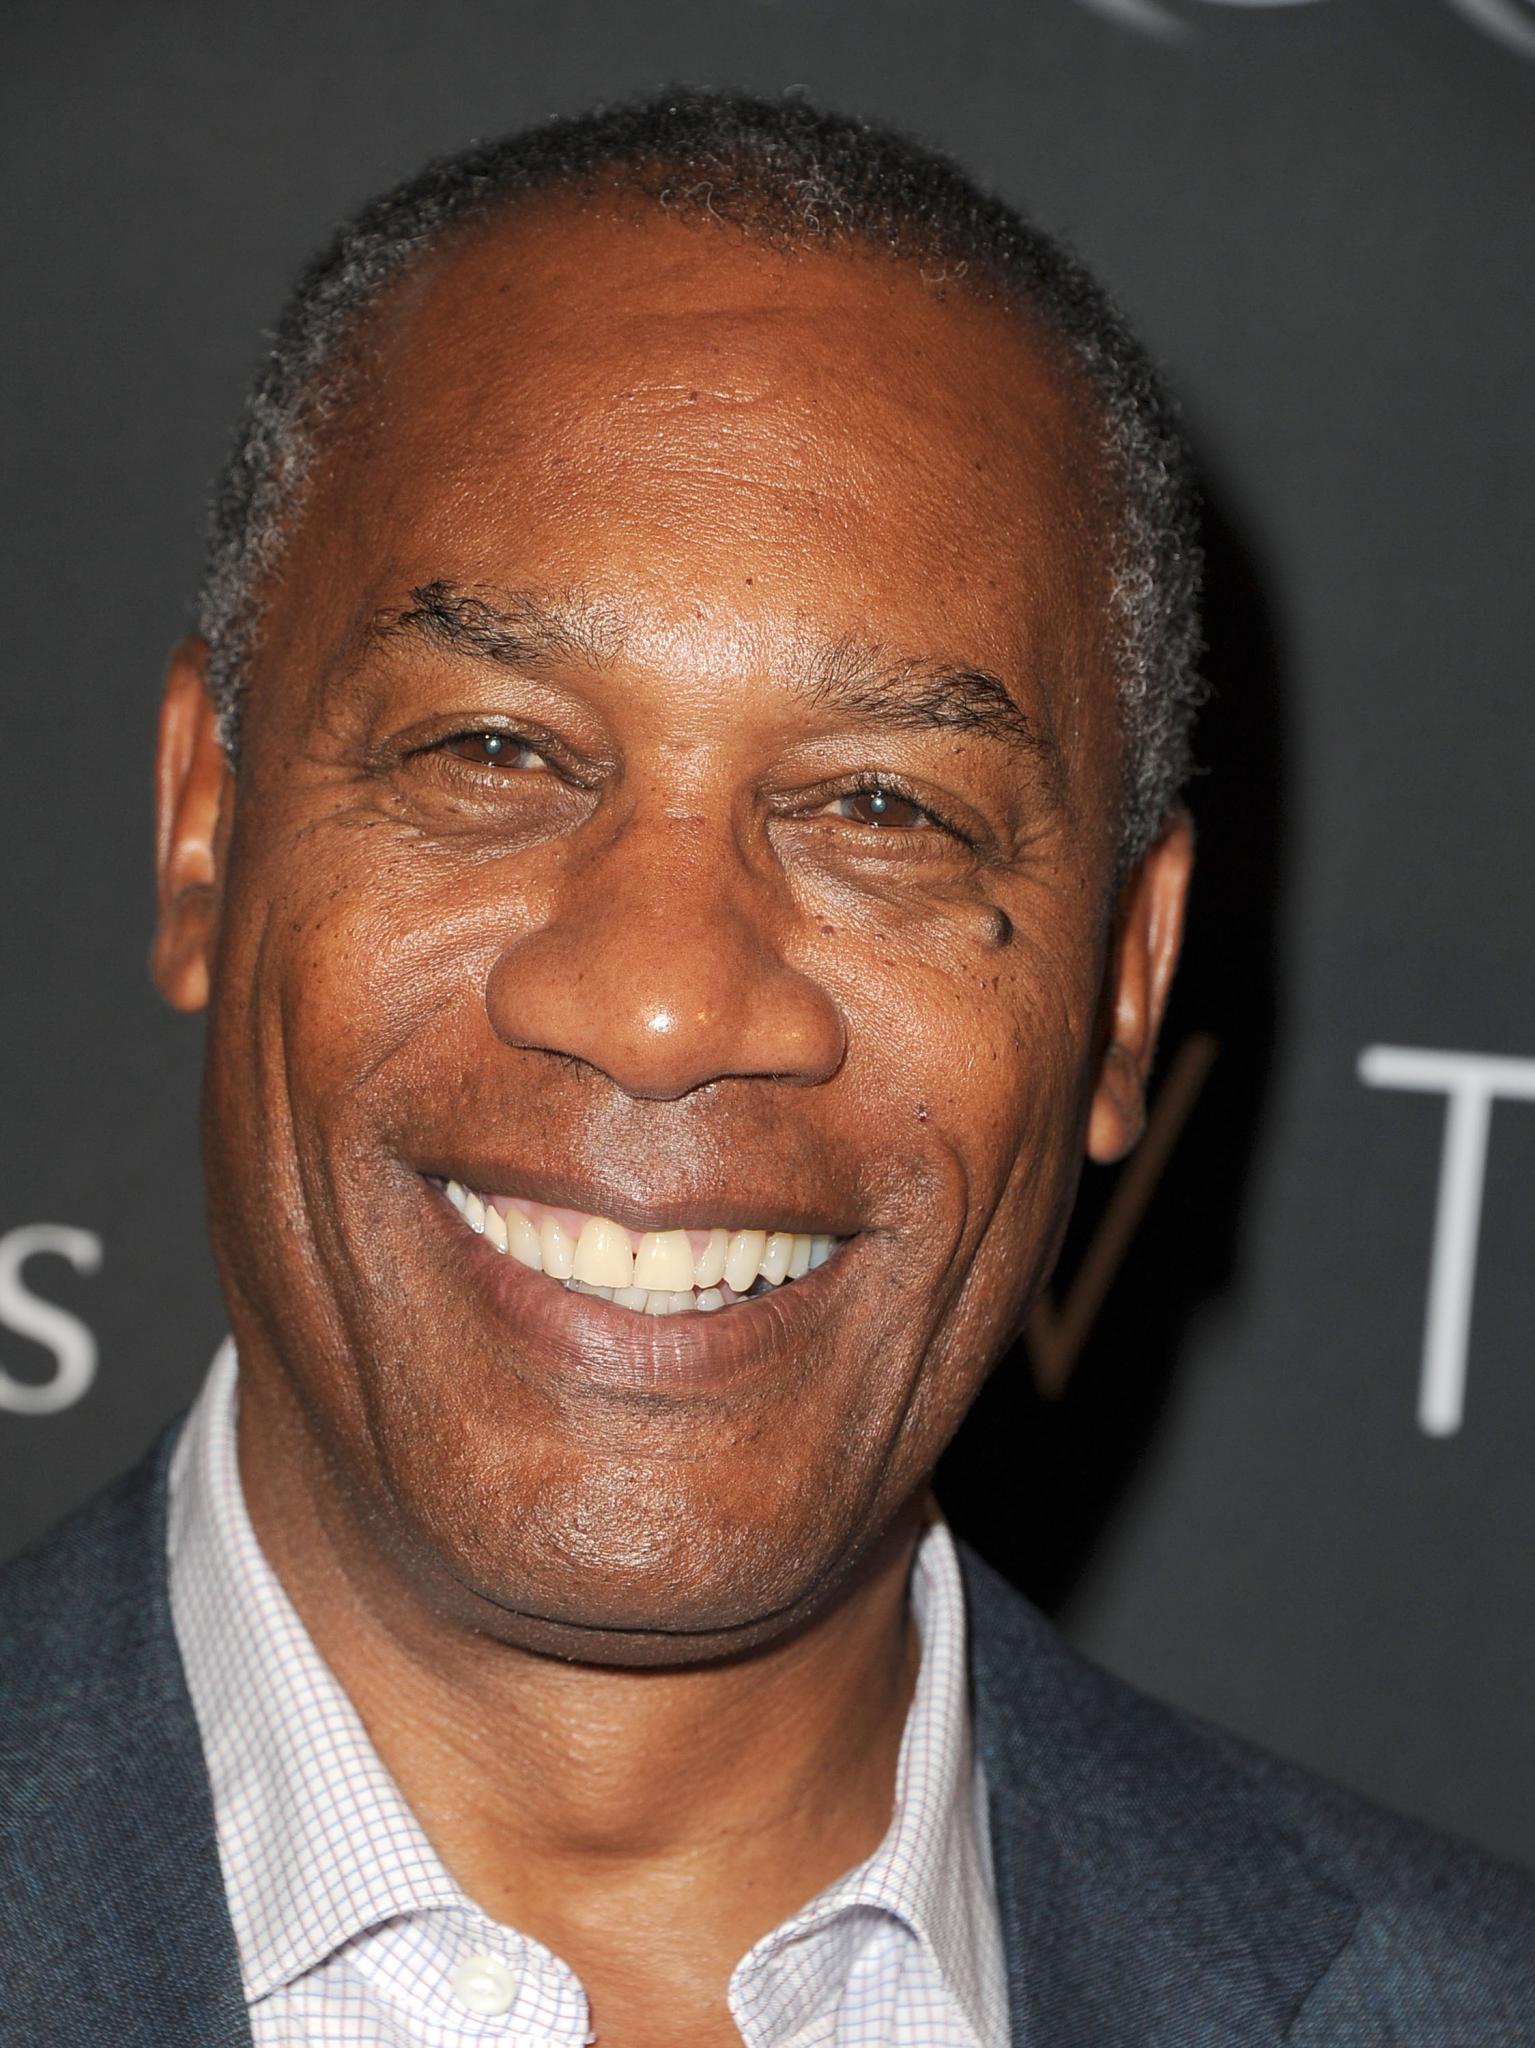 EXCLUSIVE: ‘Scandal’ Dad Joe Morton on Season 3, TV Daughter Olivia, and Casting ‘Mrs. Pope’